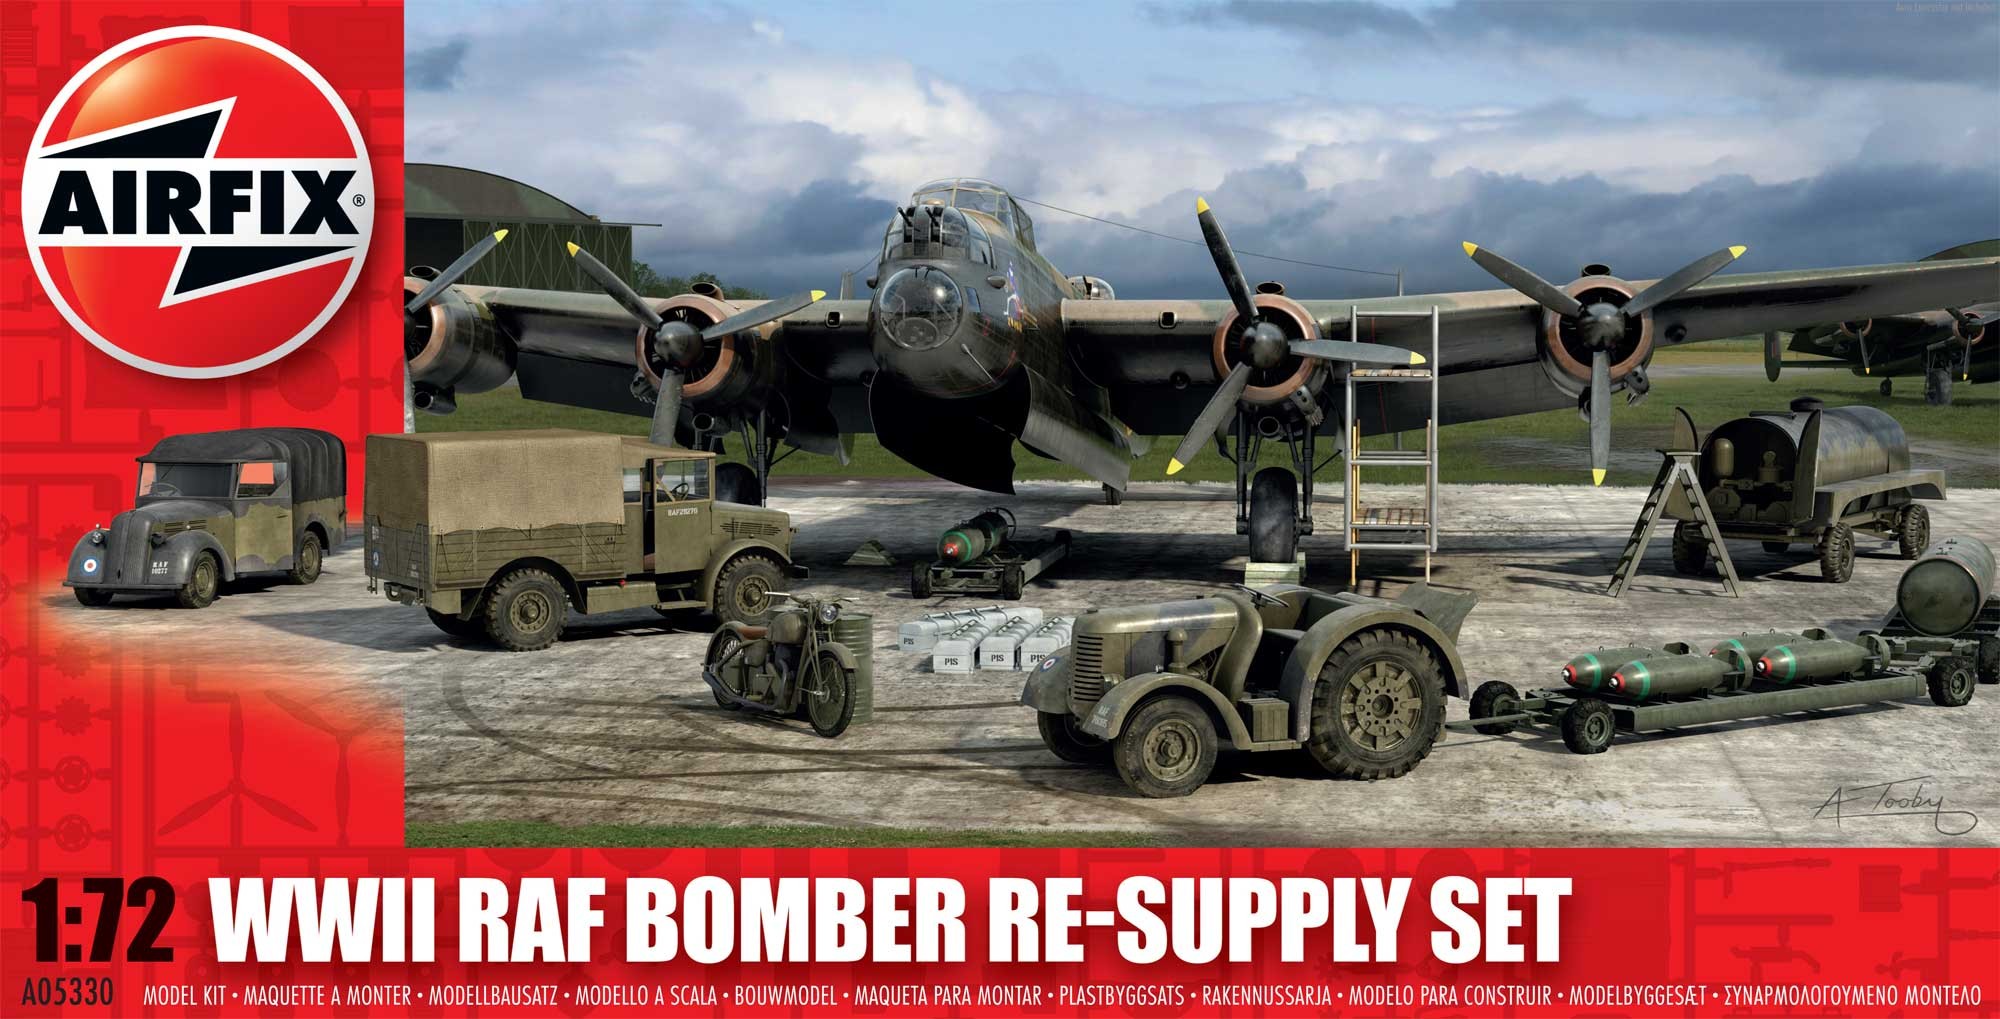 Airfix WWII Bomber Re-Supply Set in 1:72 bouwpallet